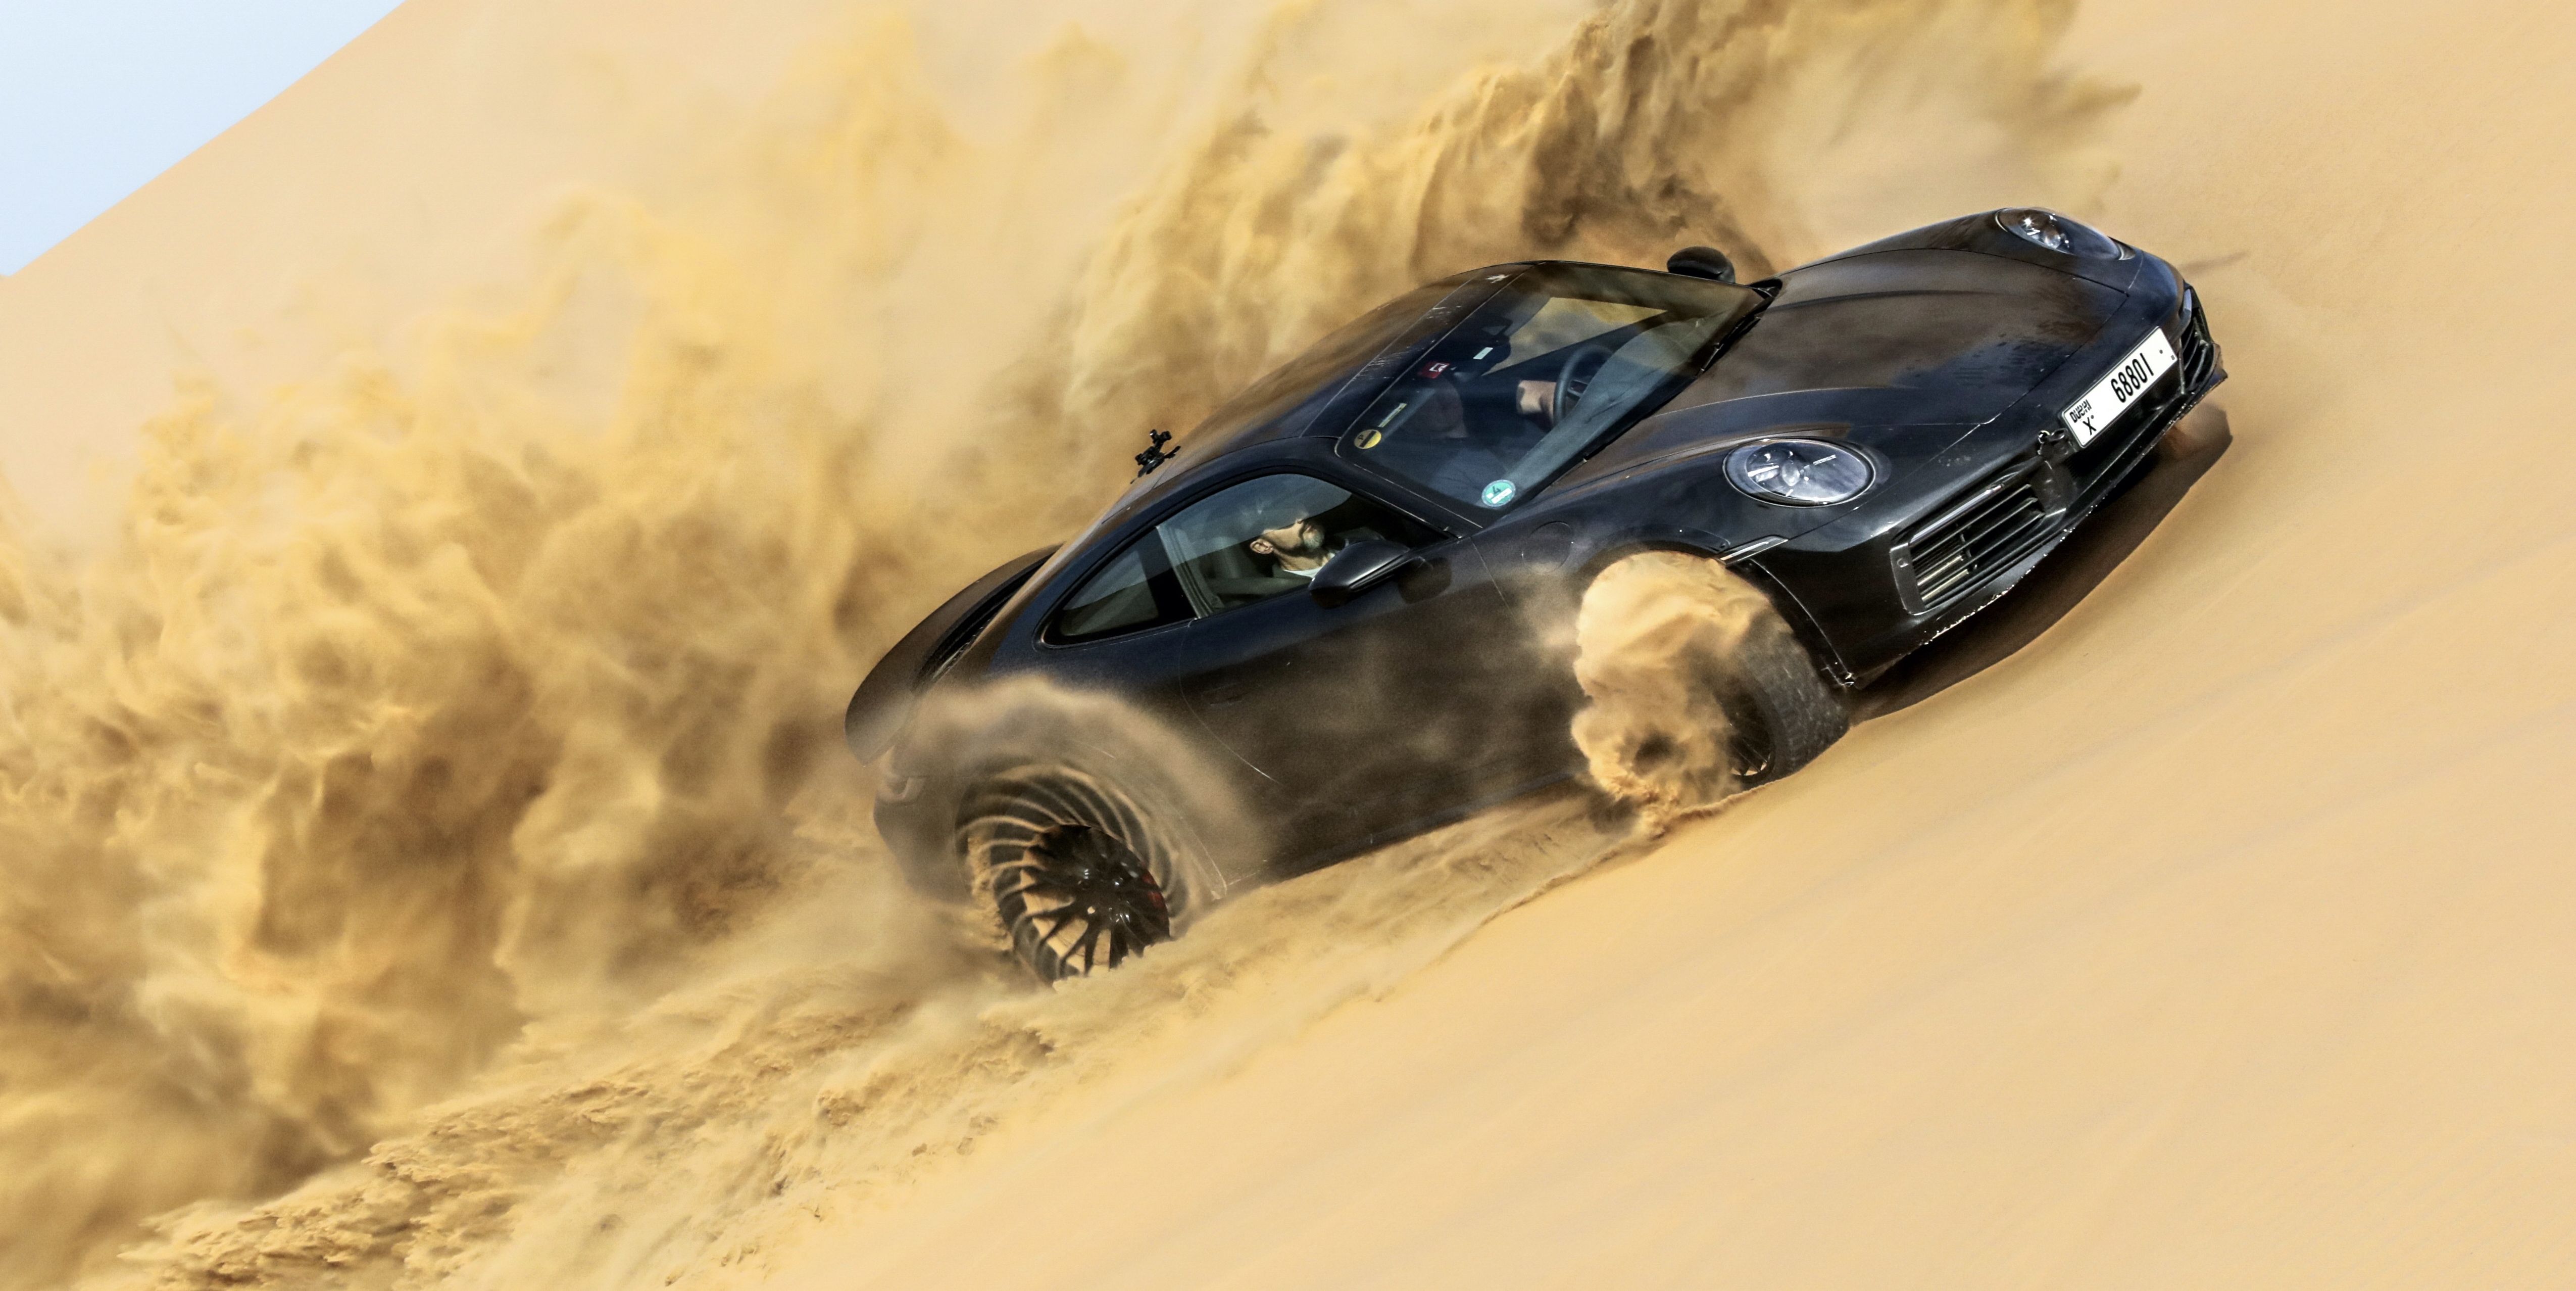 We Finally Have Our First Official Look at the Factory Off-road Porsche 911